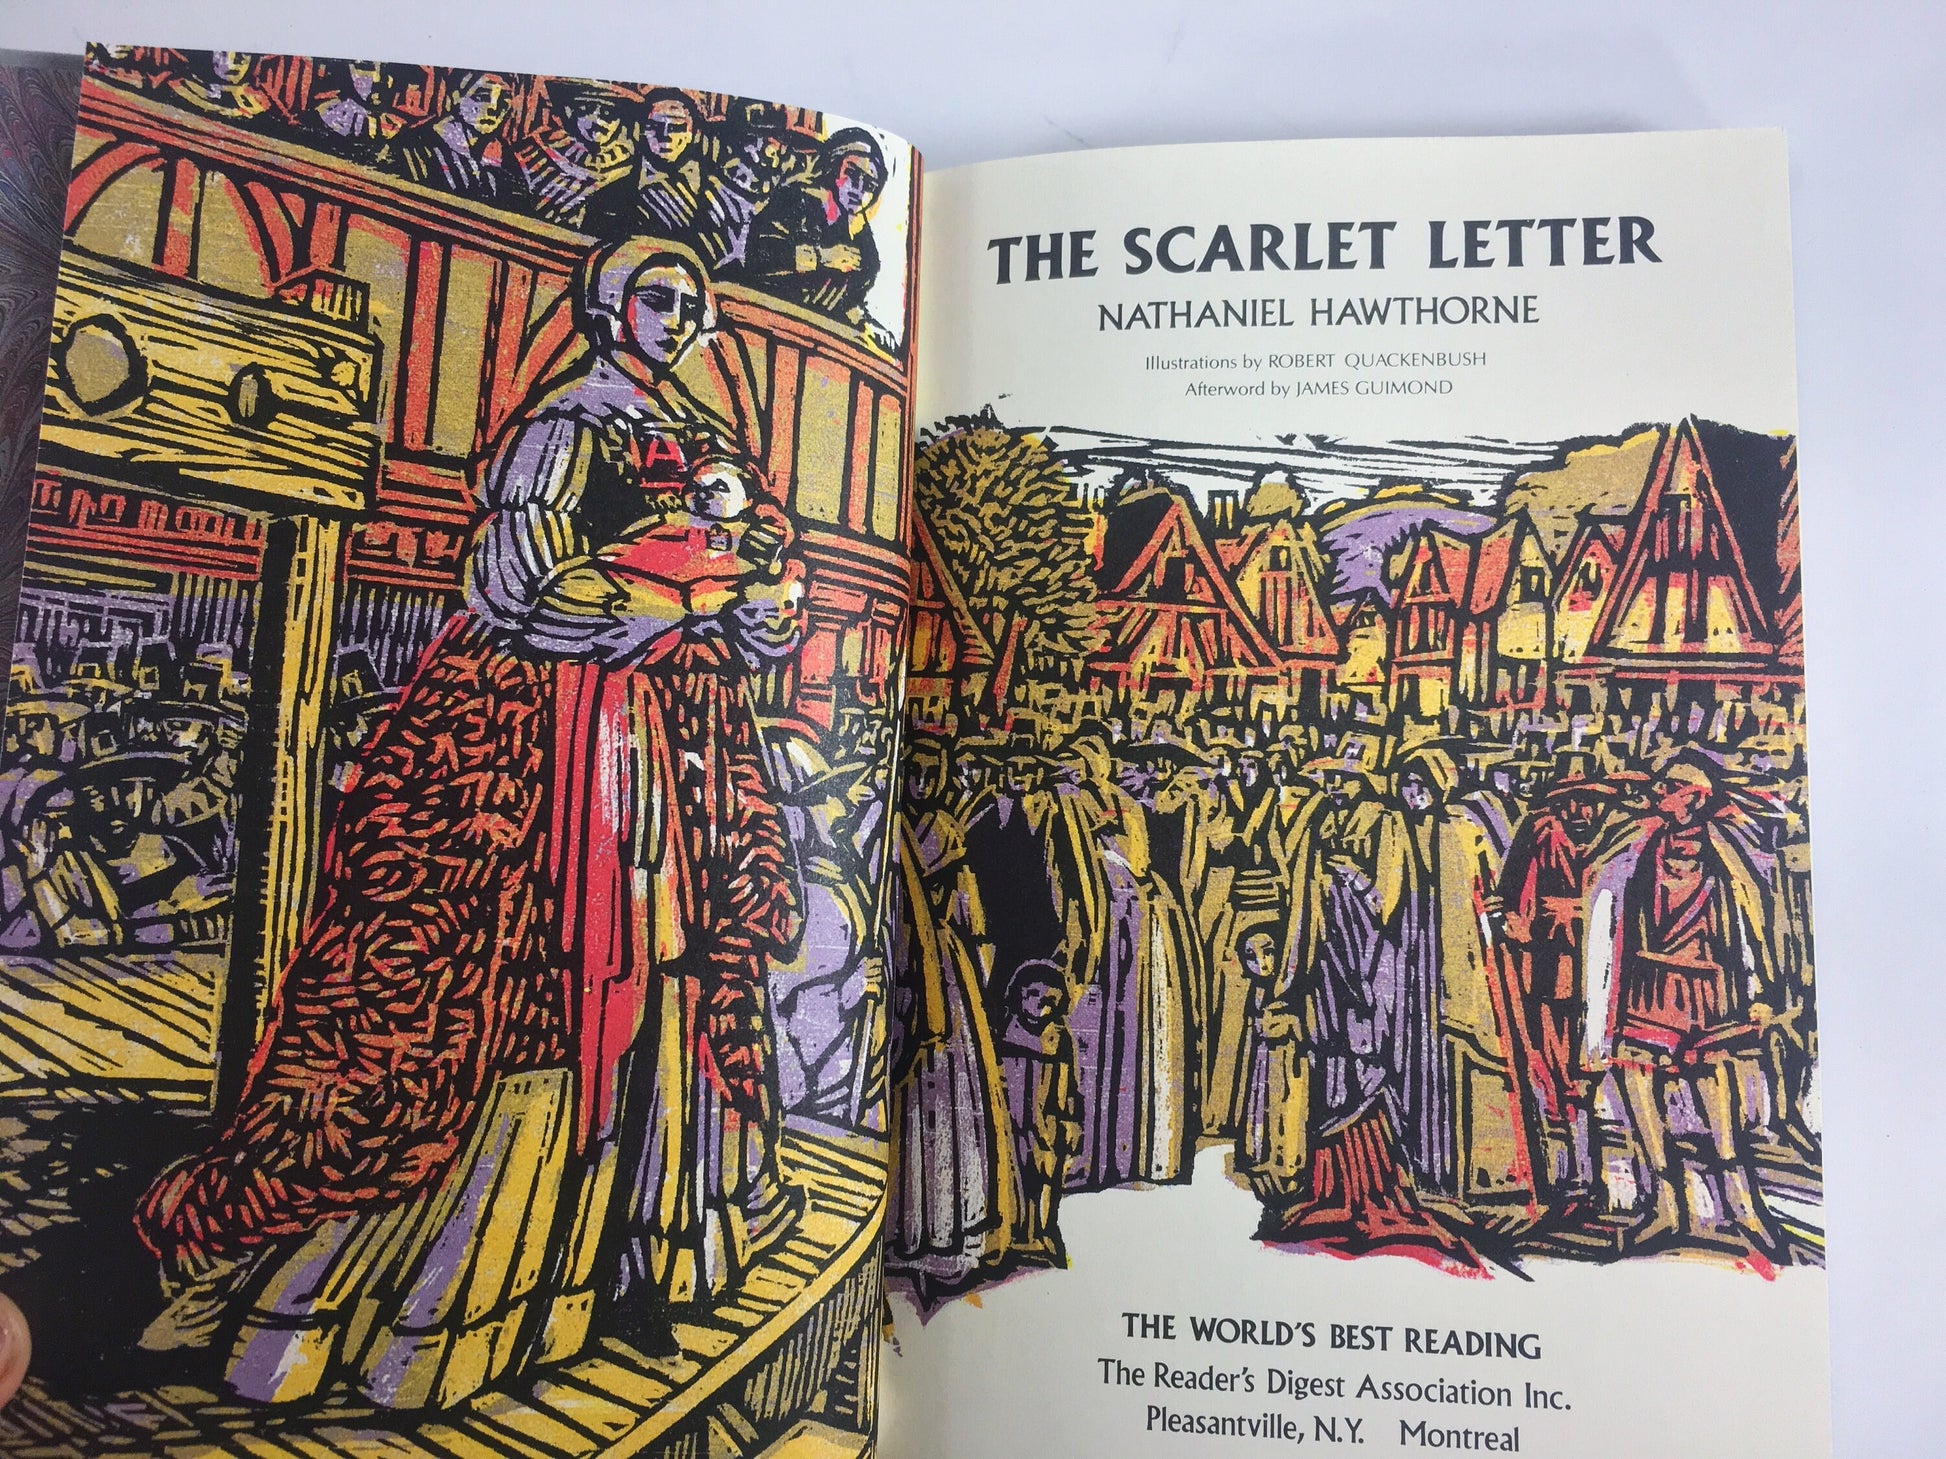 Scarlet Letter by Nathaniel Hawthorne circa 1985. Readers Digest book series. Vintage book circa 1984